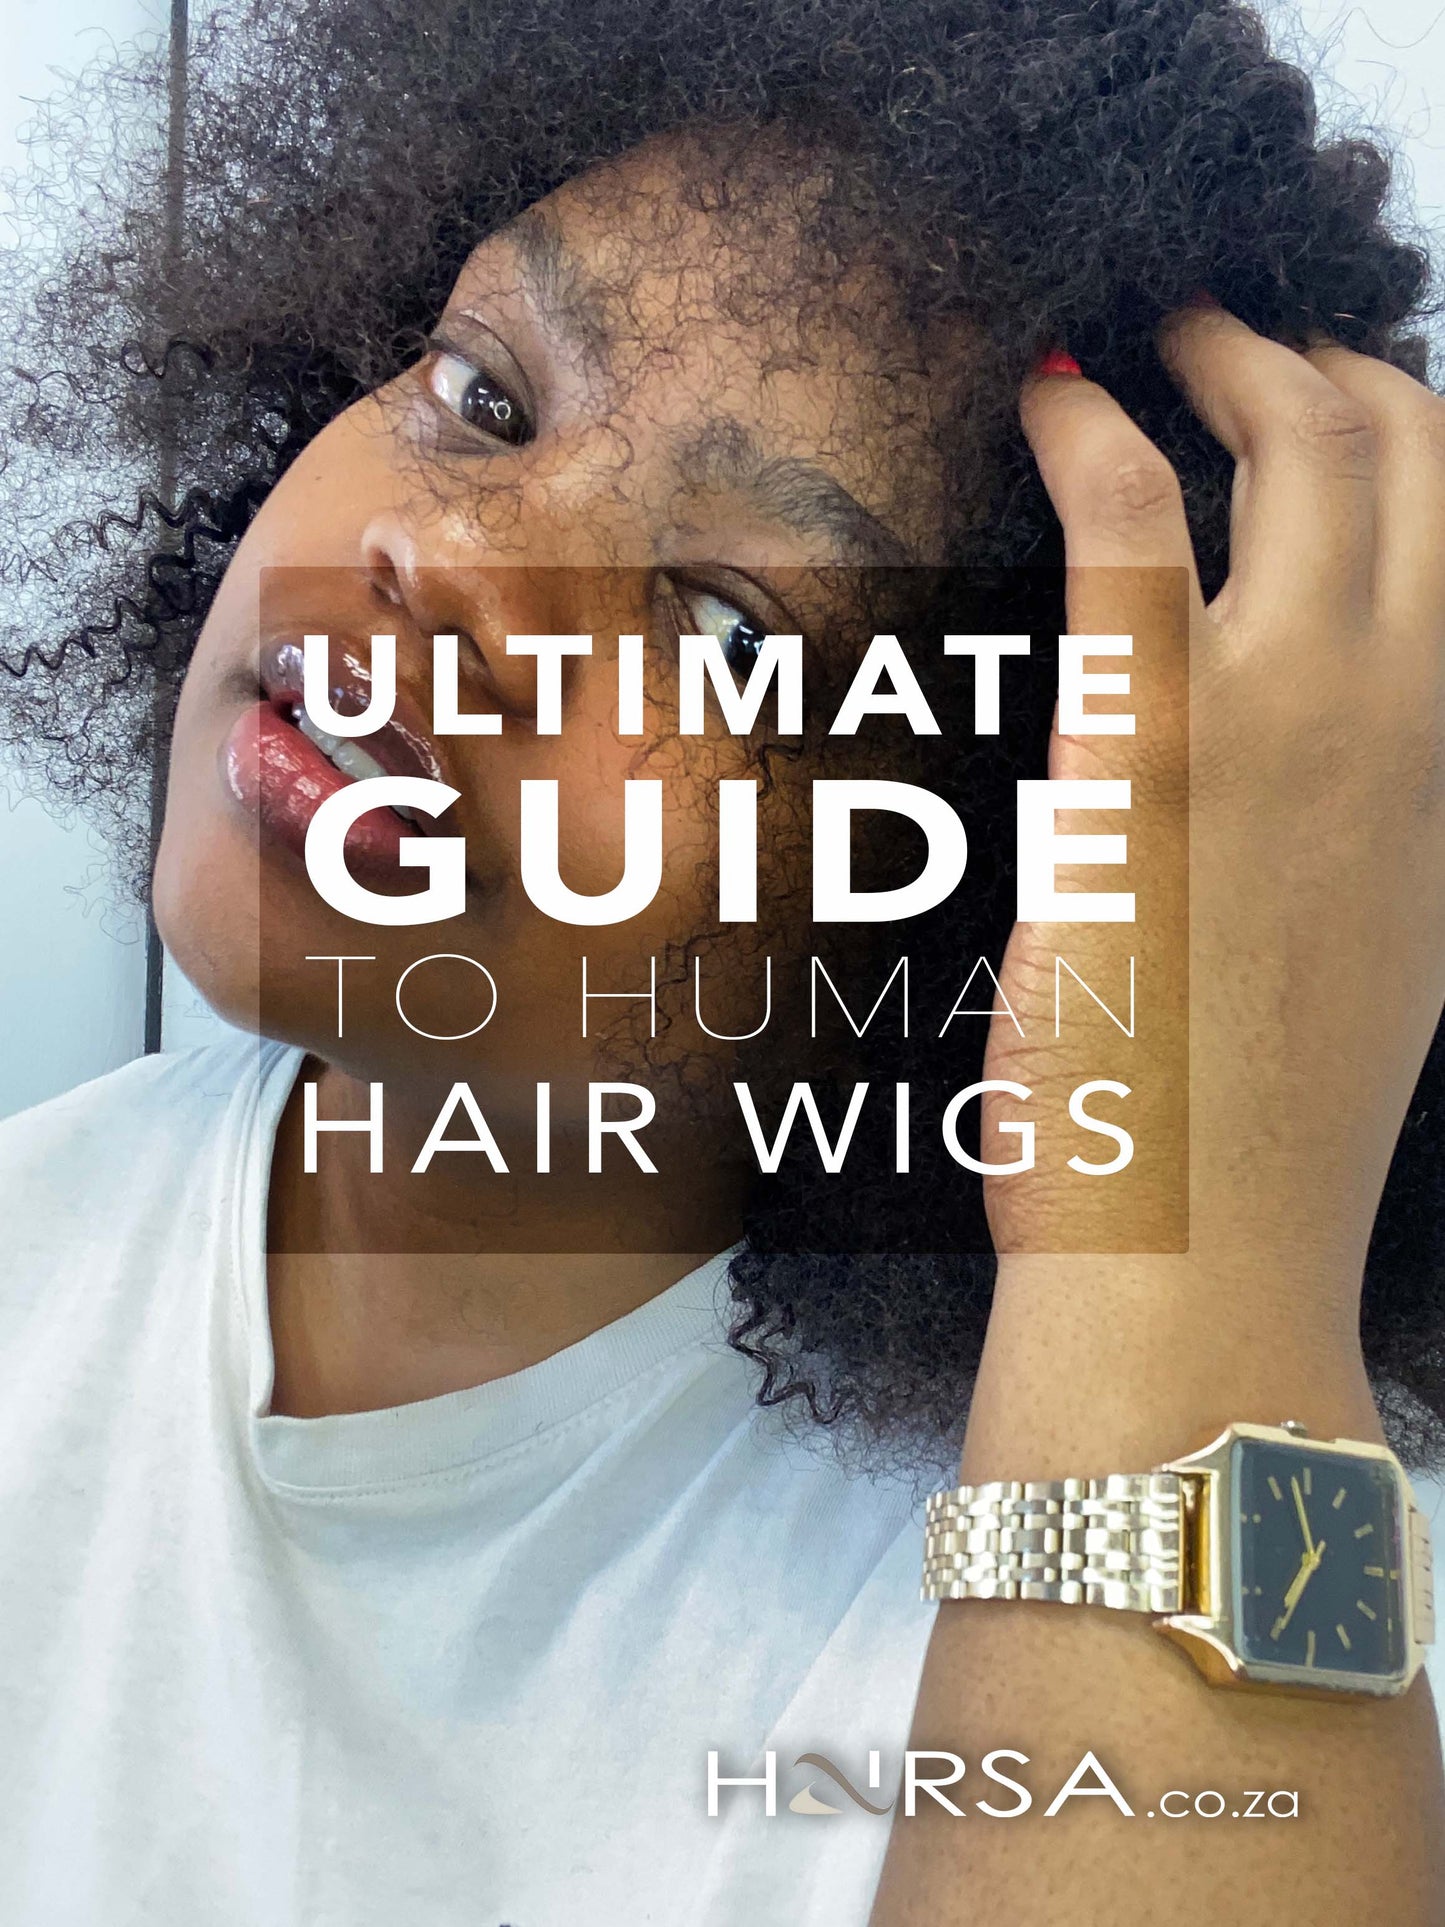  The Ultimate Guide to Human Hair Wigs: Everything You Need to Know